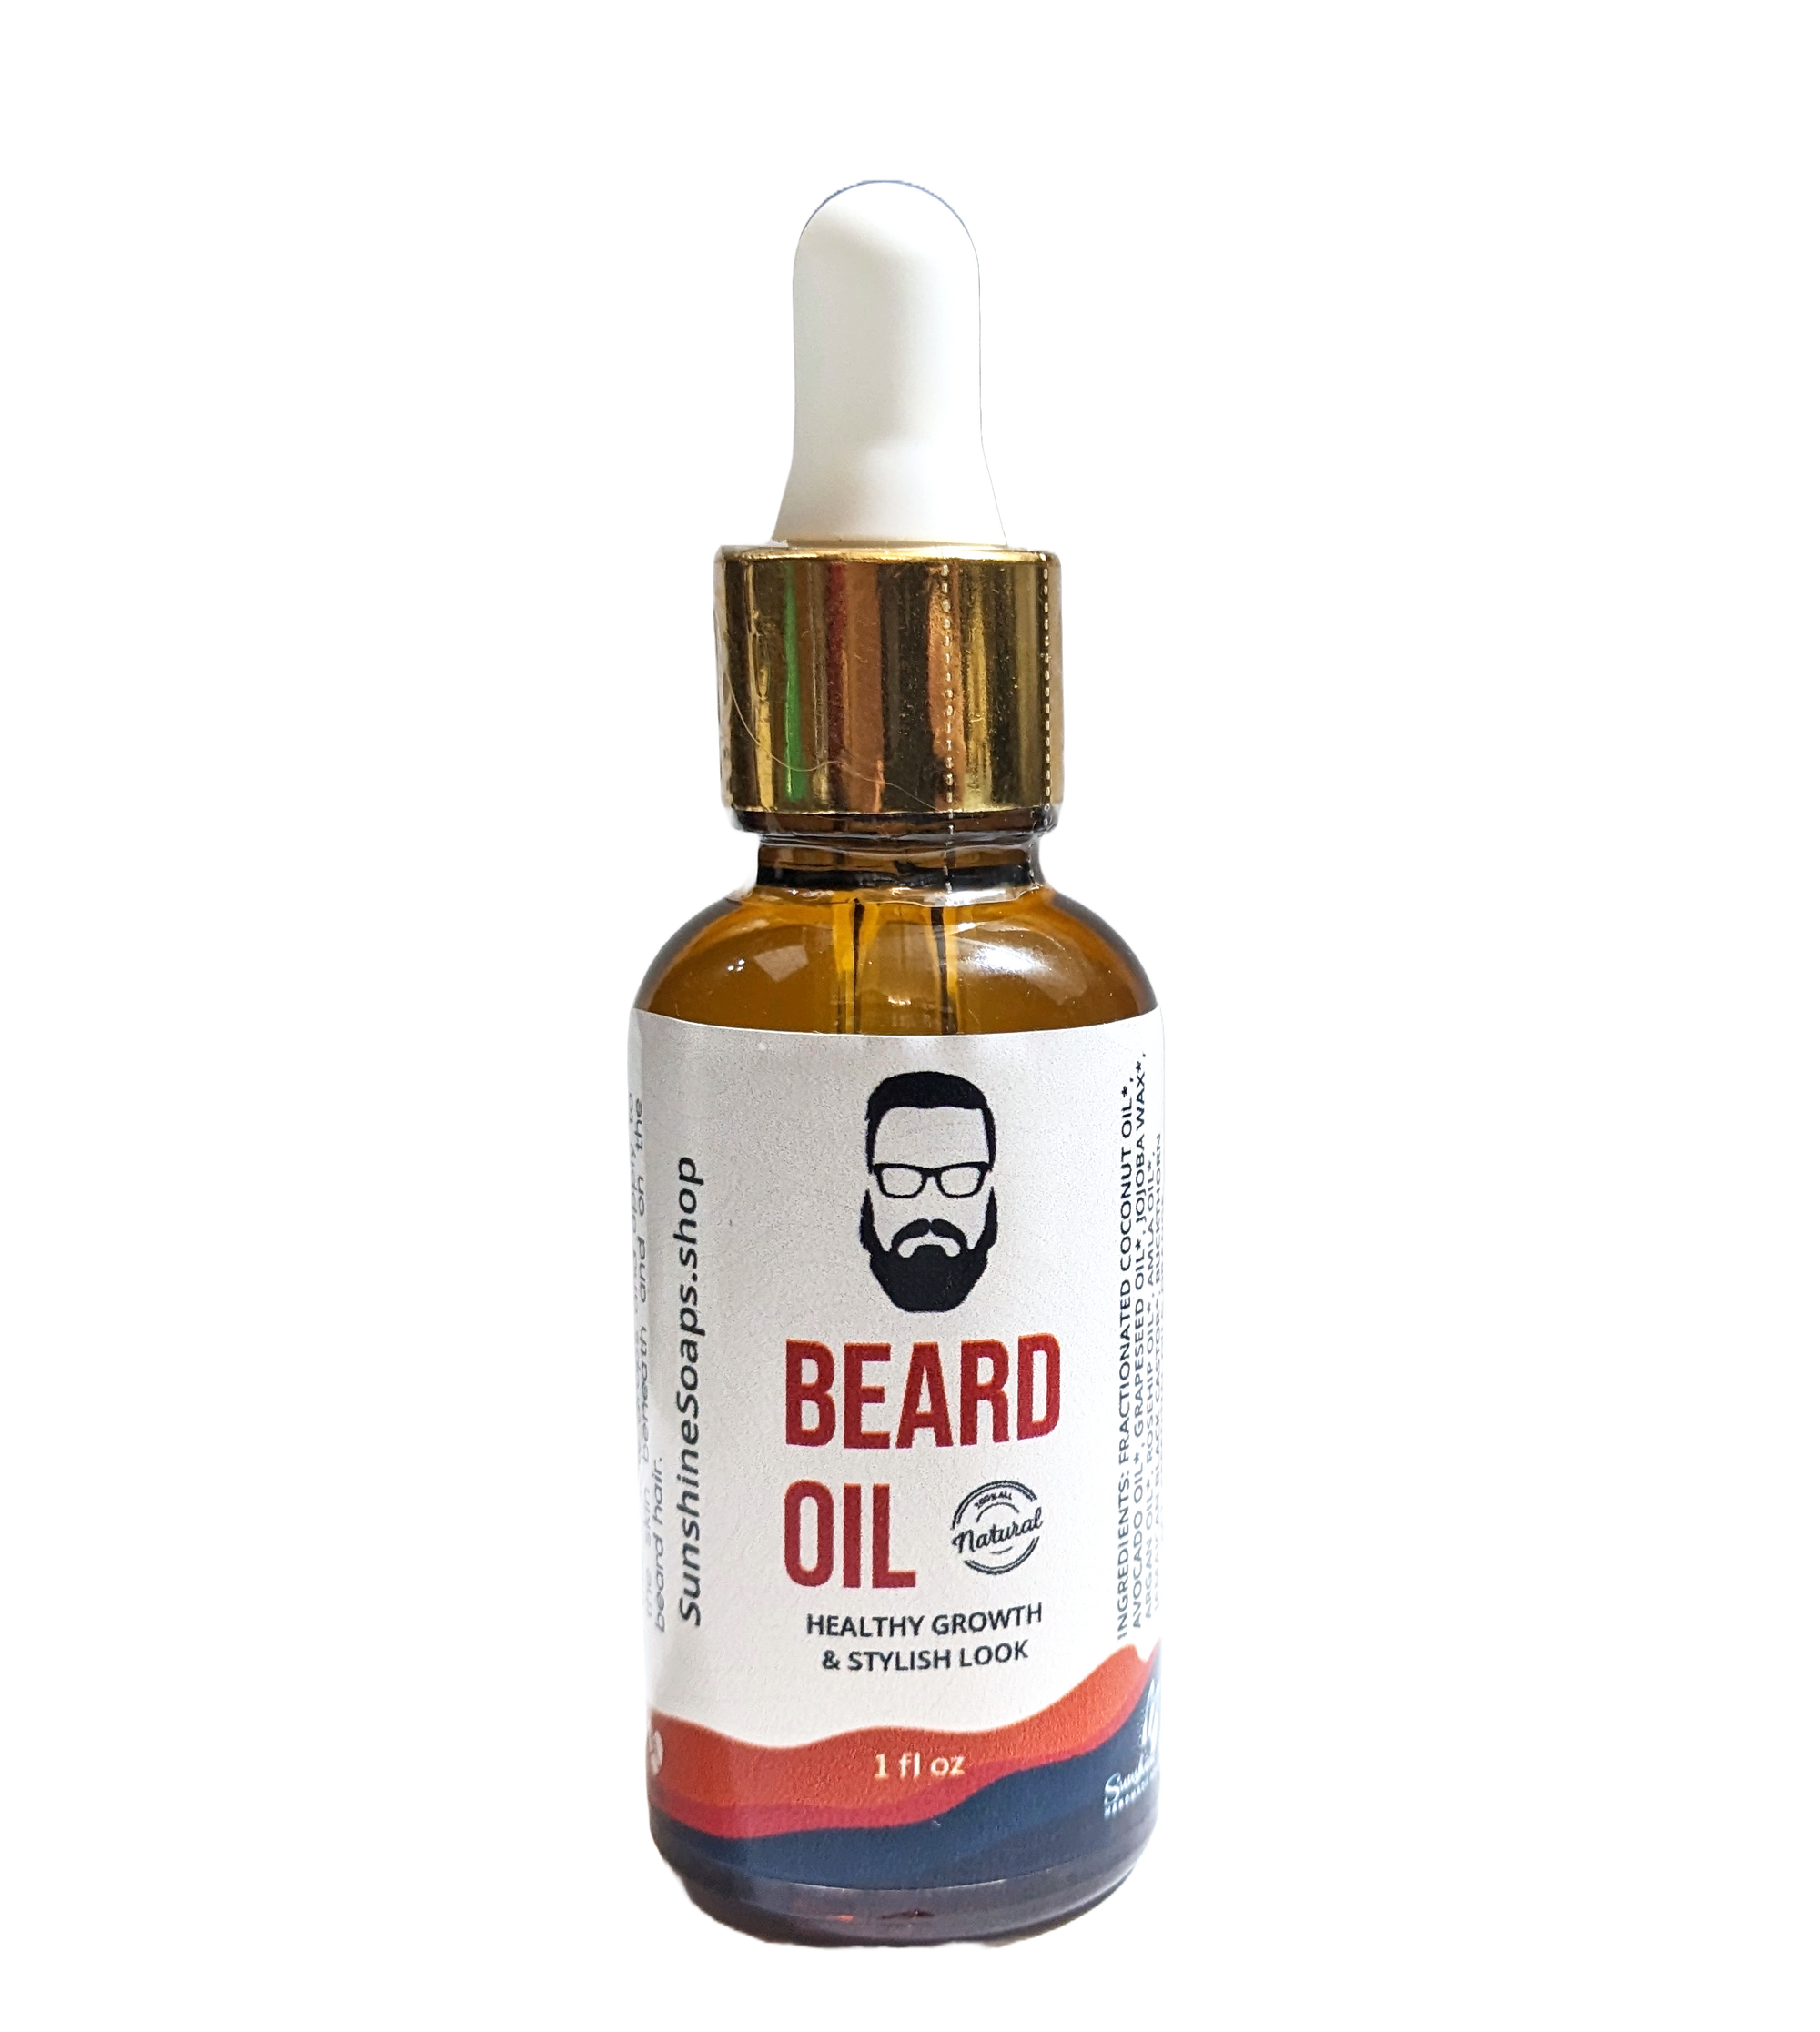 Healthy Growth & Stylish Look Beard Oil - Handmade Beard Oil - All Natural with Essential Oils and Extracts - 1 OZ